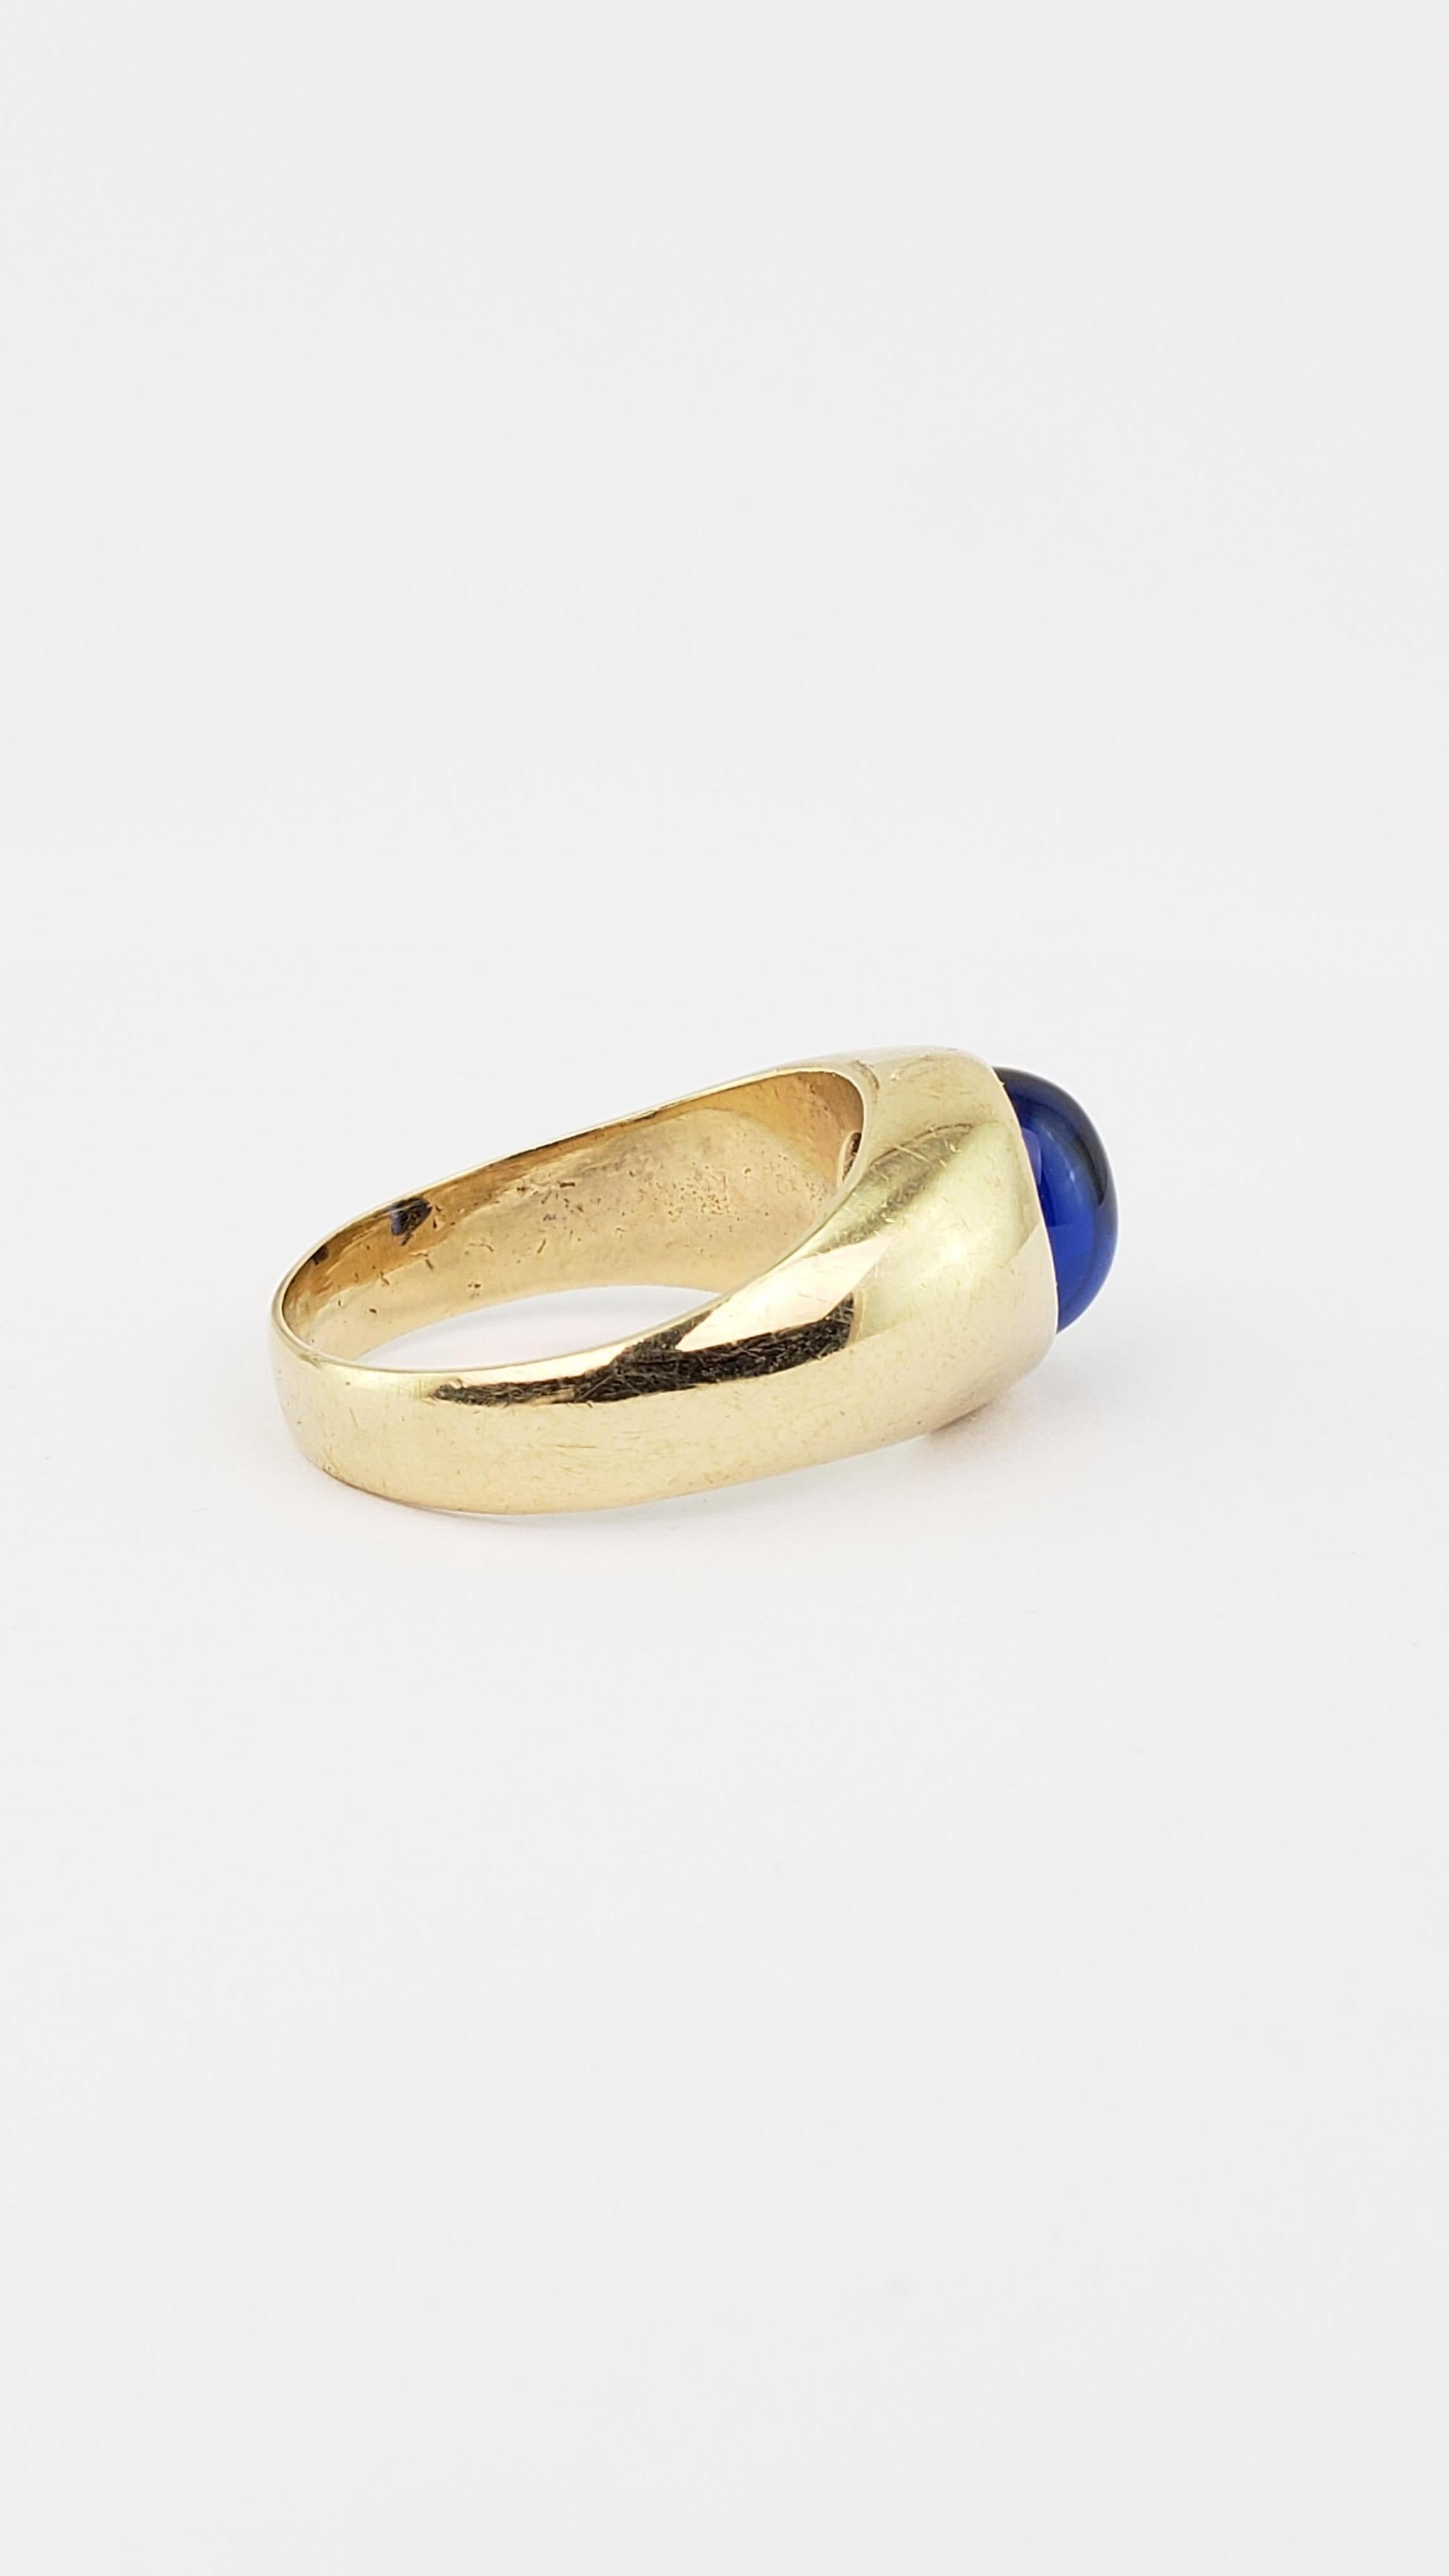 20th Century 10K Gold Men's or Lady's Ring with Synthetic Blue Sapphire Oval Cabochon